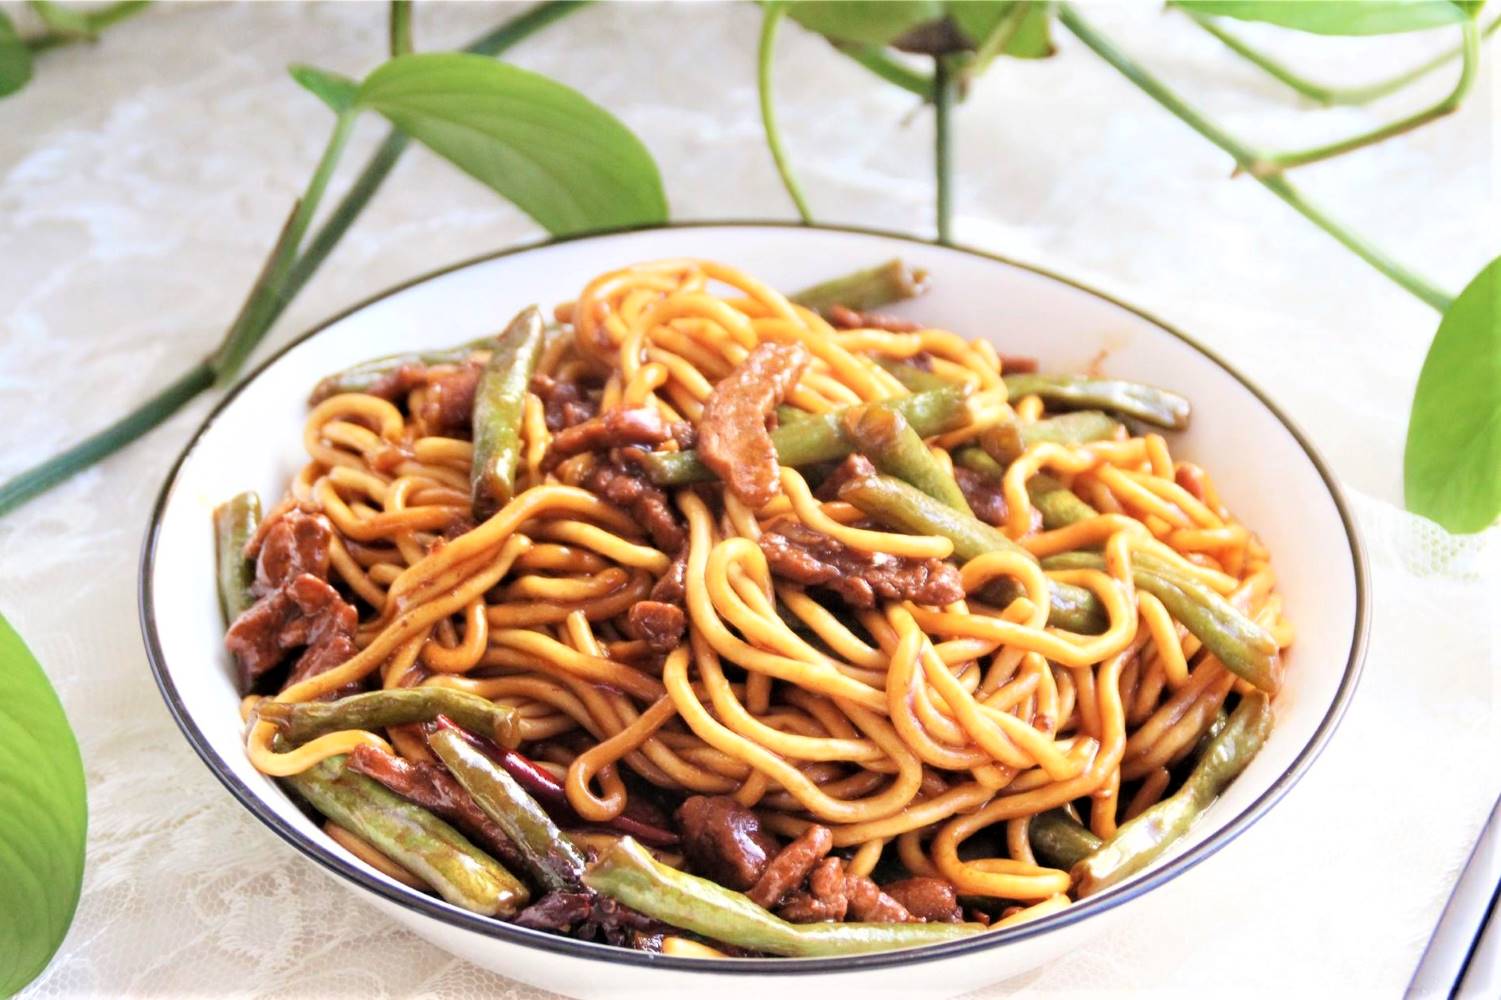 Fried Noodles with Green Beans and Pork Recipes